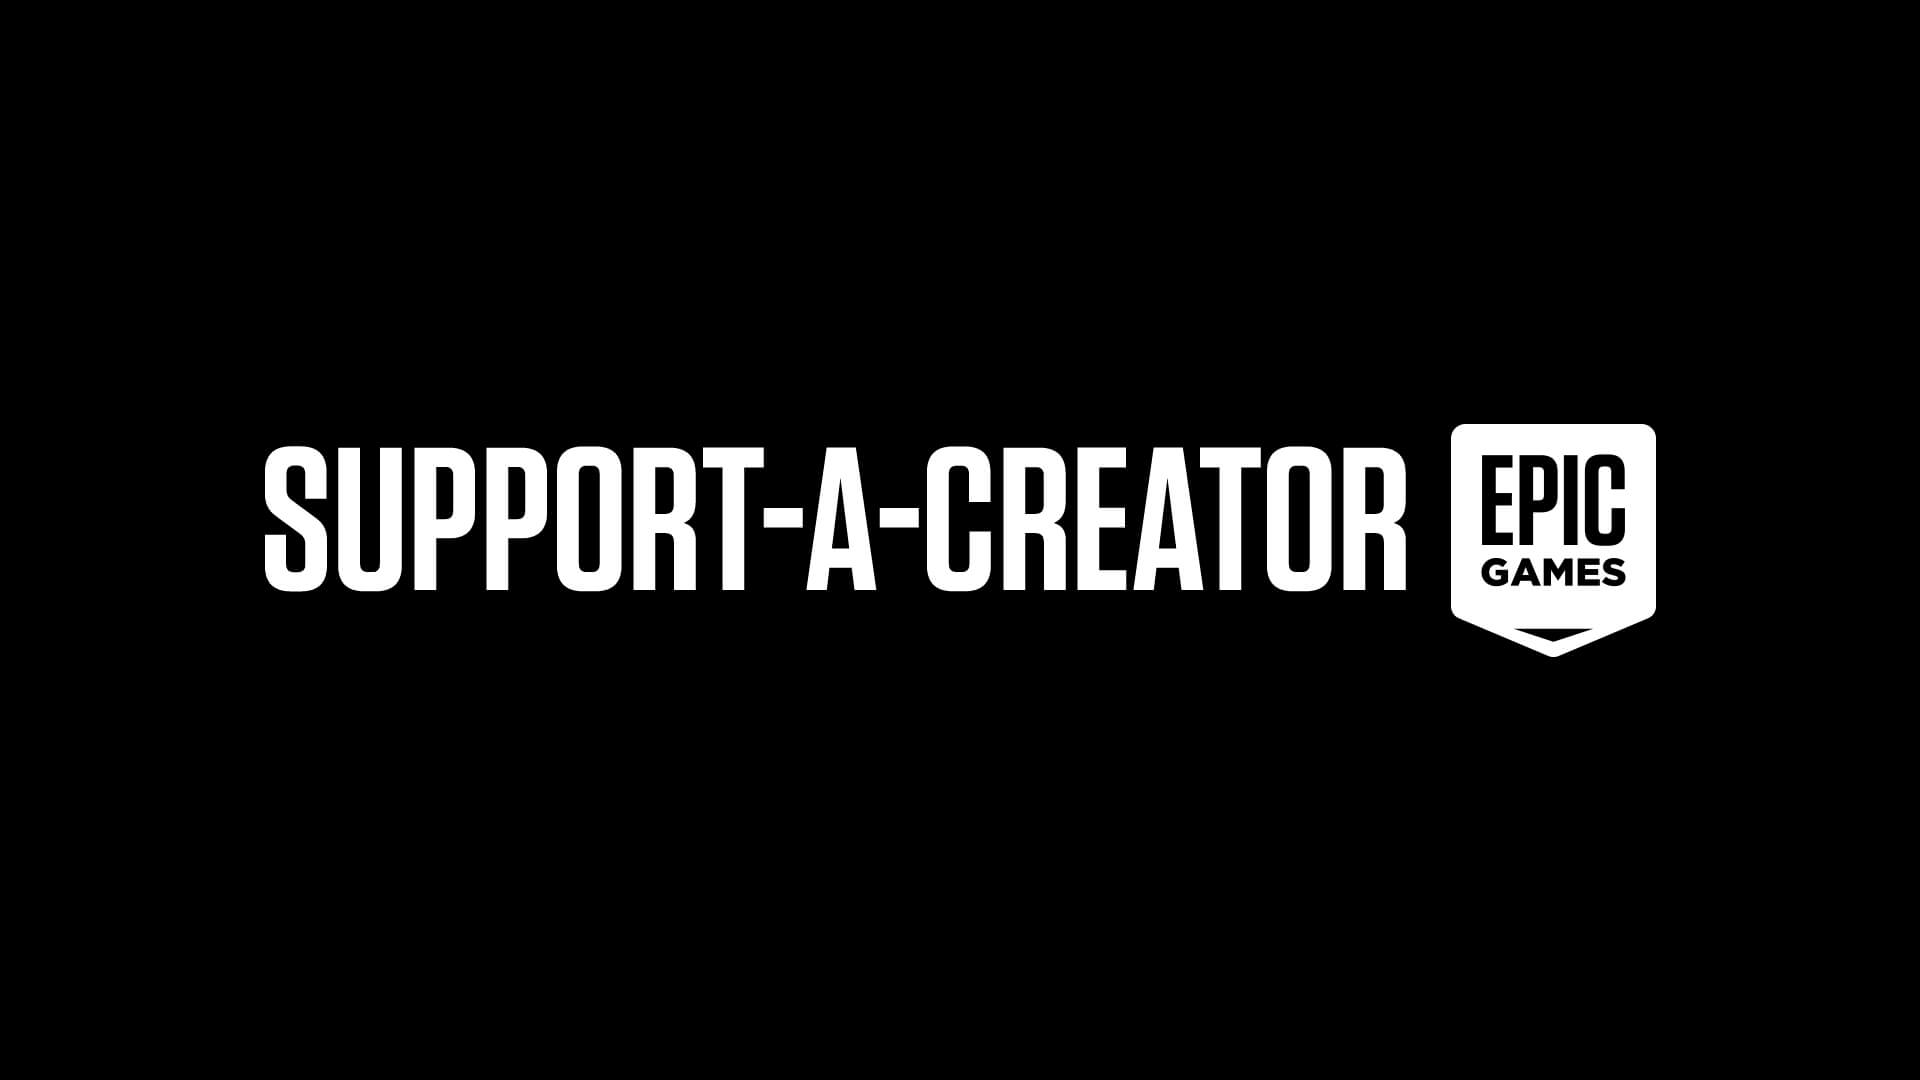 bob parks add photo how to payout support a creator